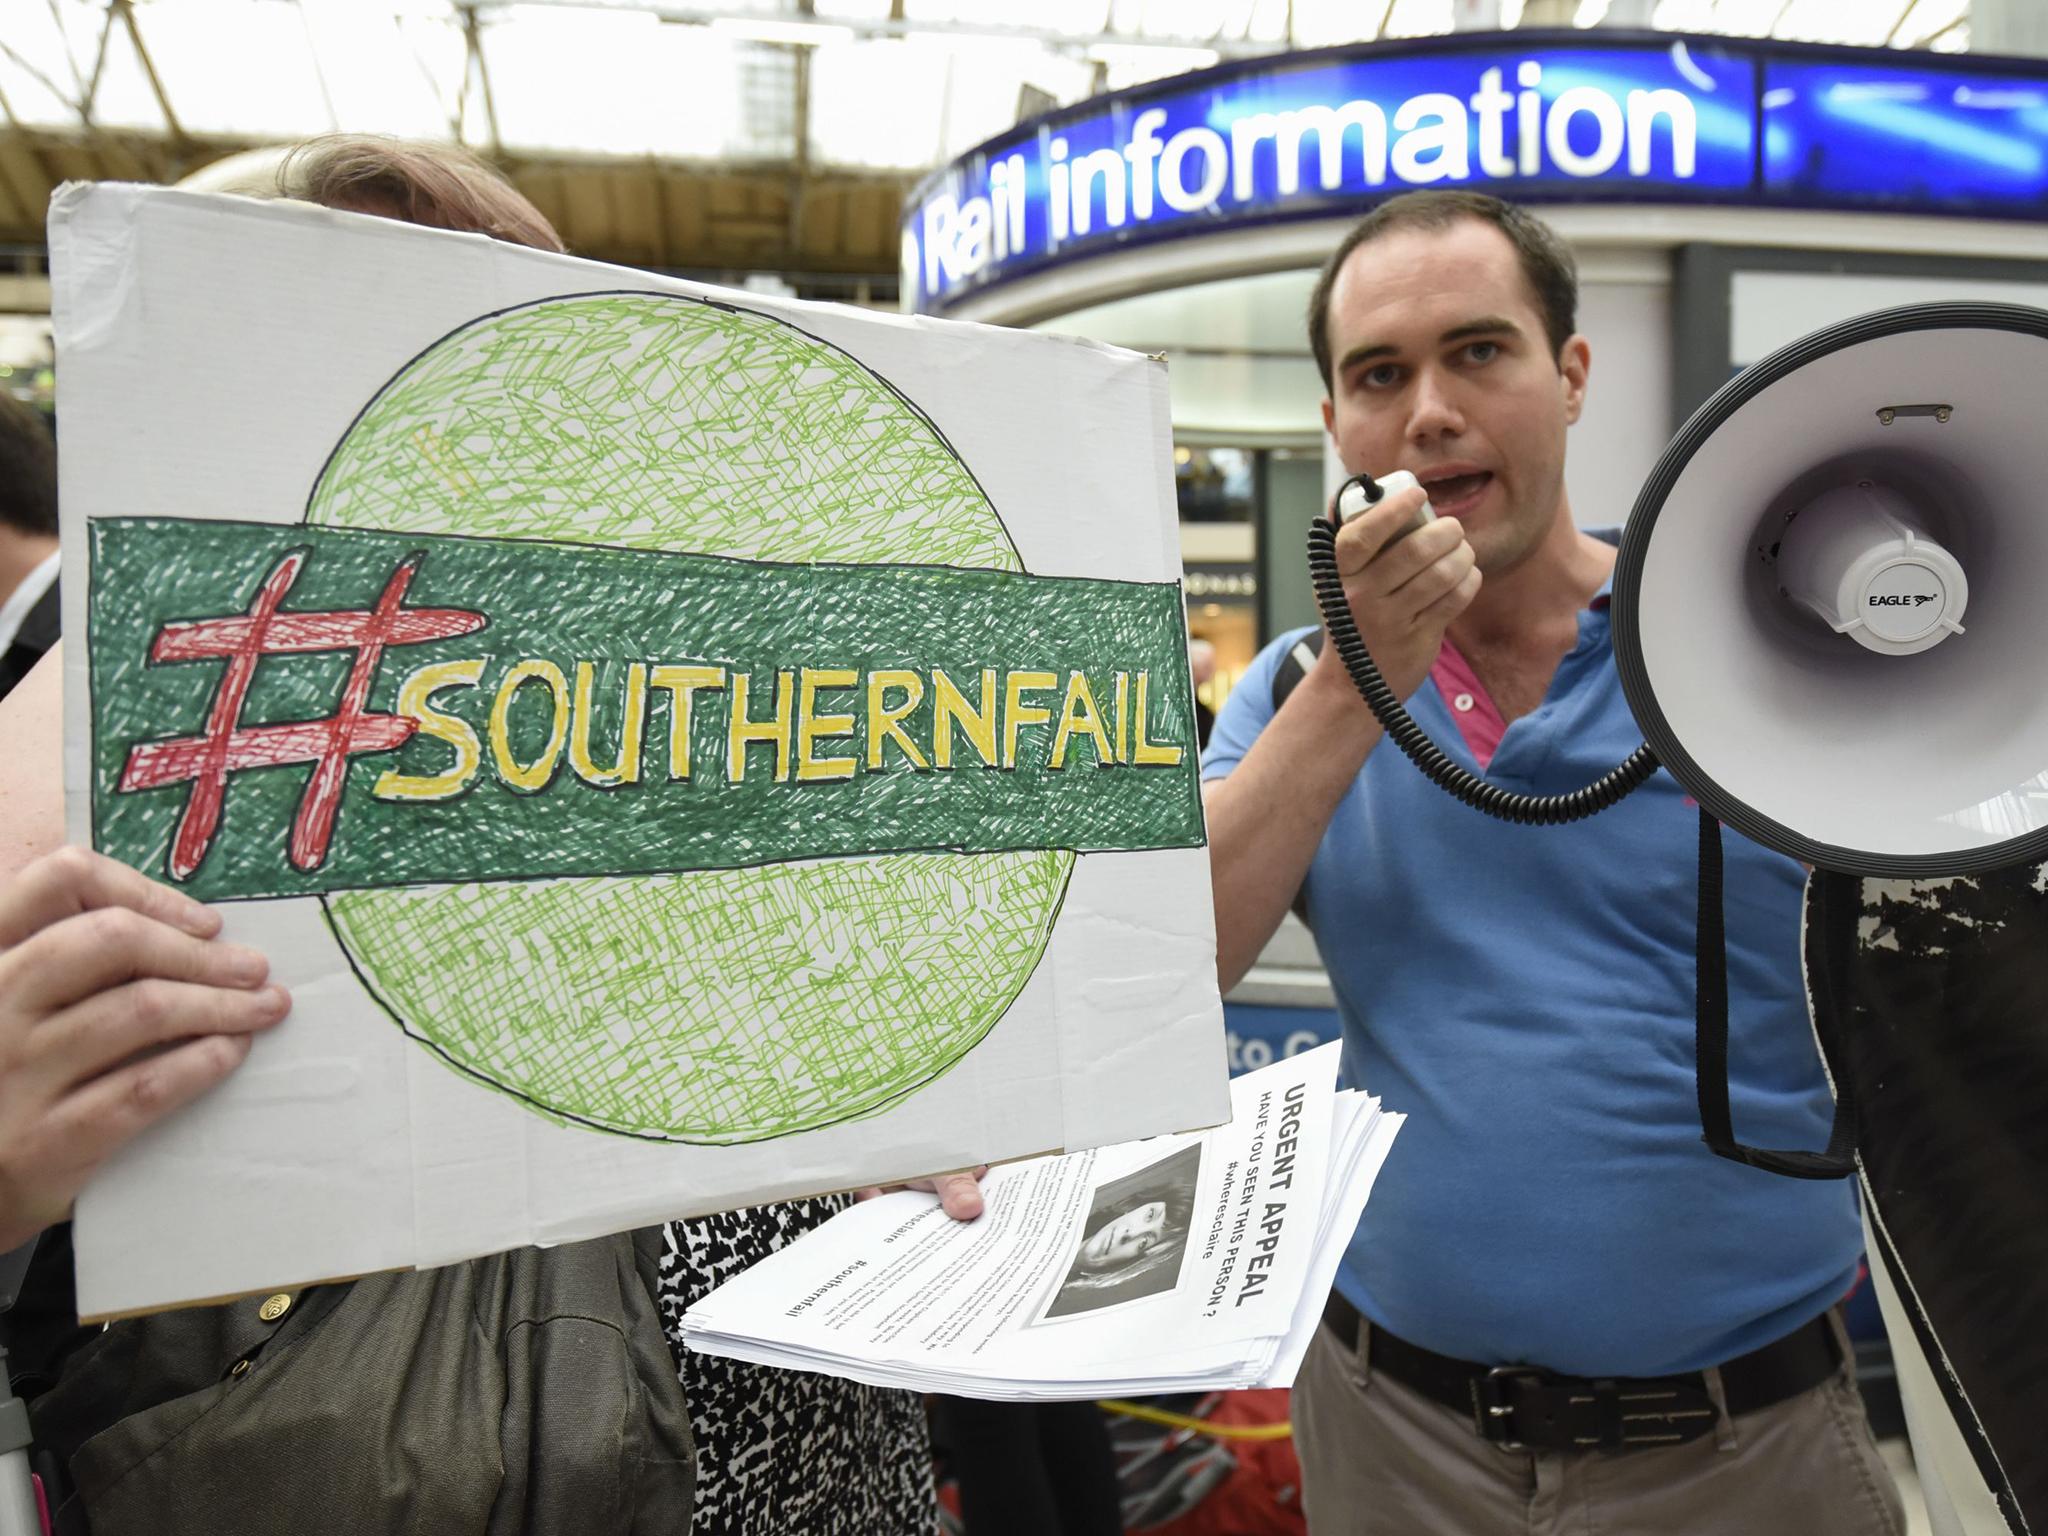 Angry commuters stage a ‘fare strike’ and protest at London’s Victoria station last month